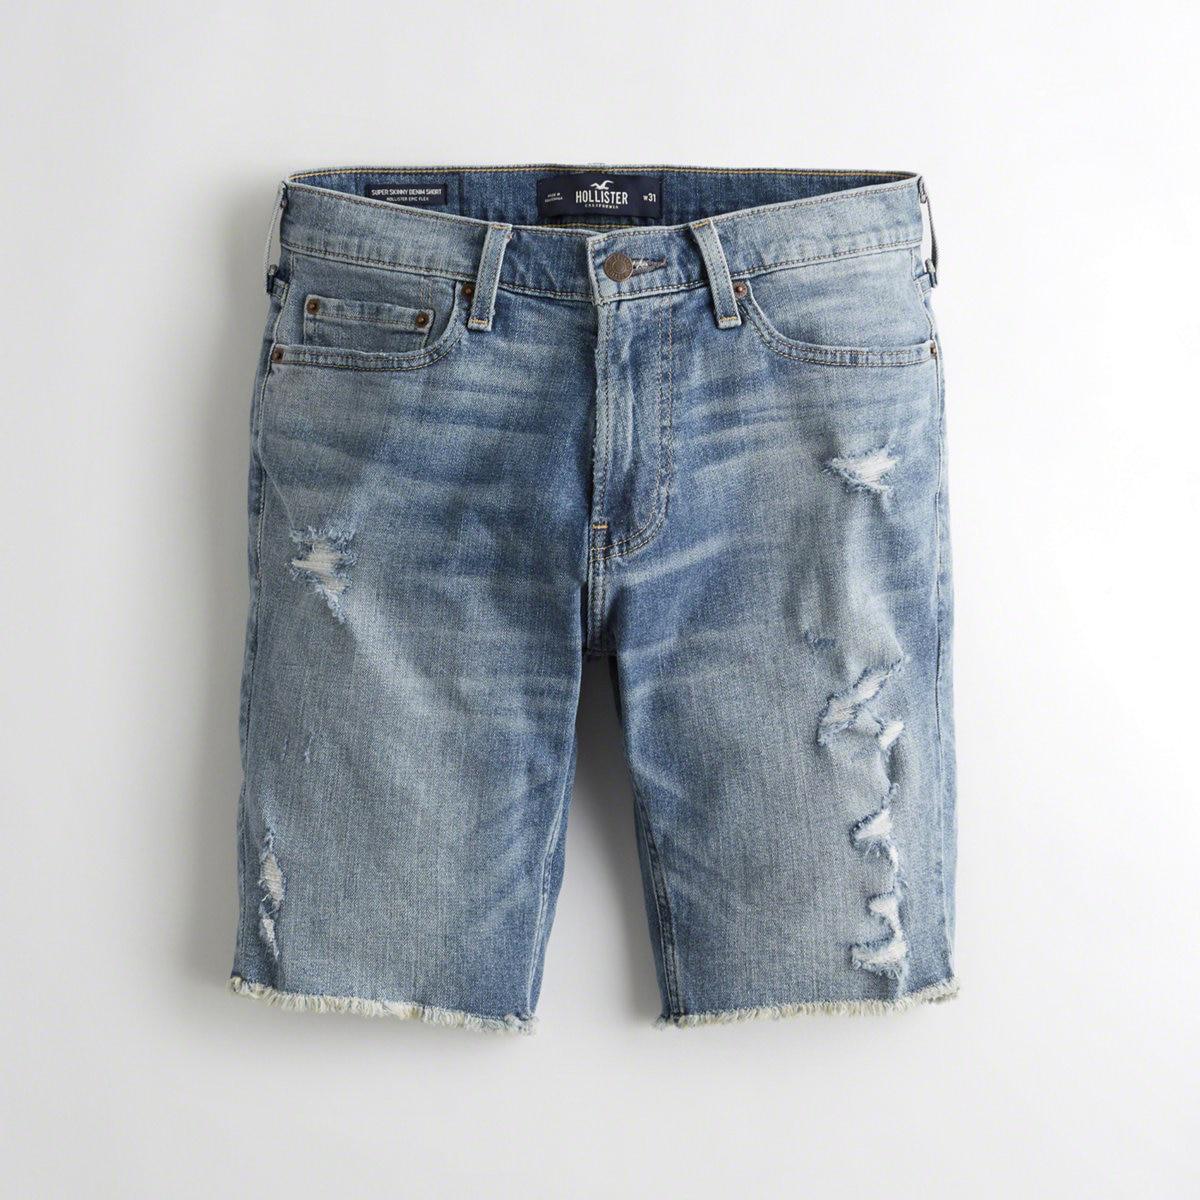 ripped jean shorts for guys